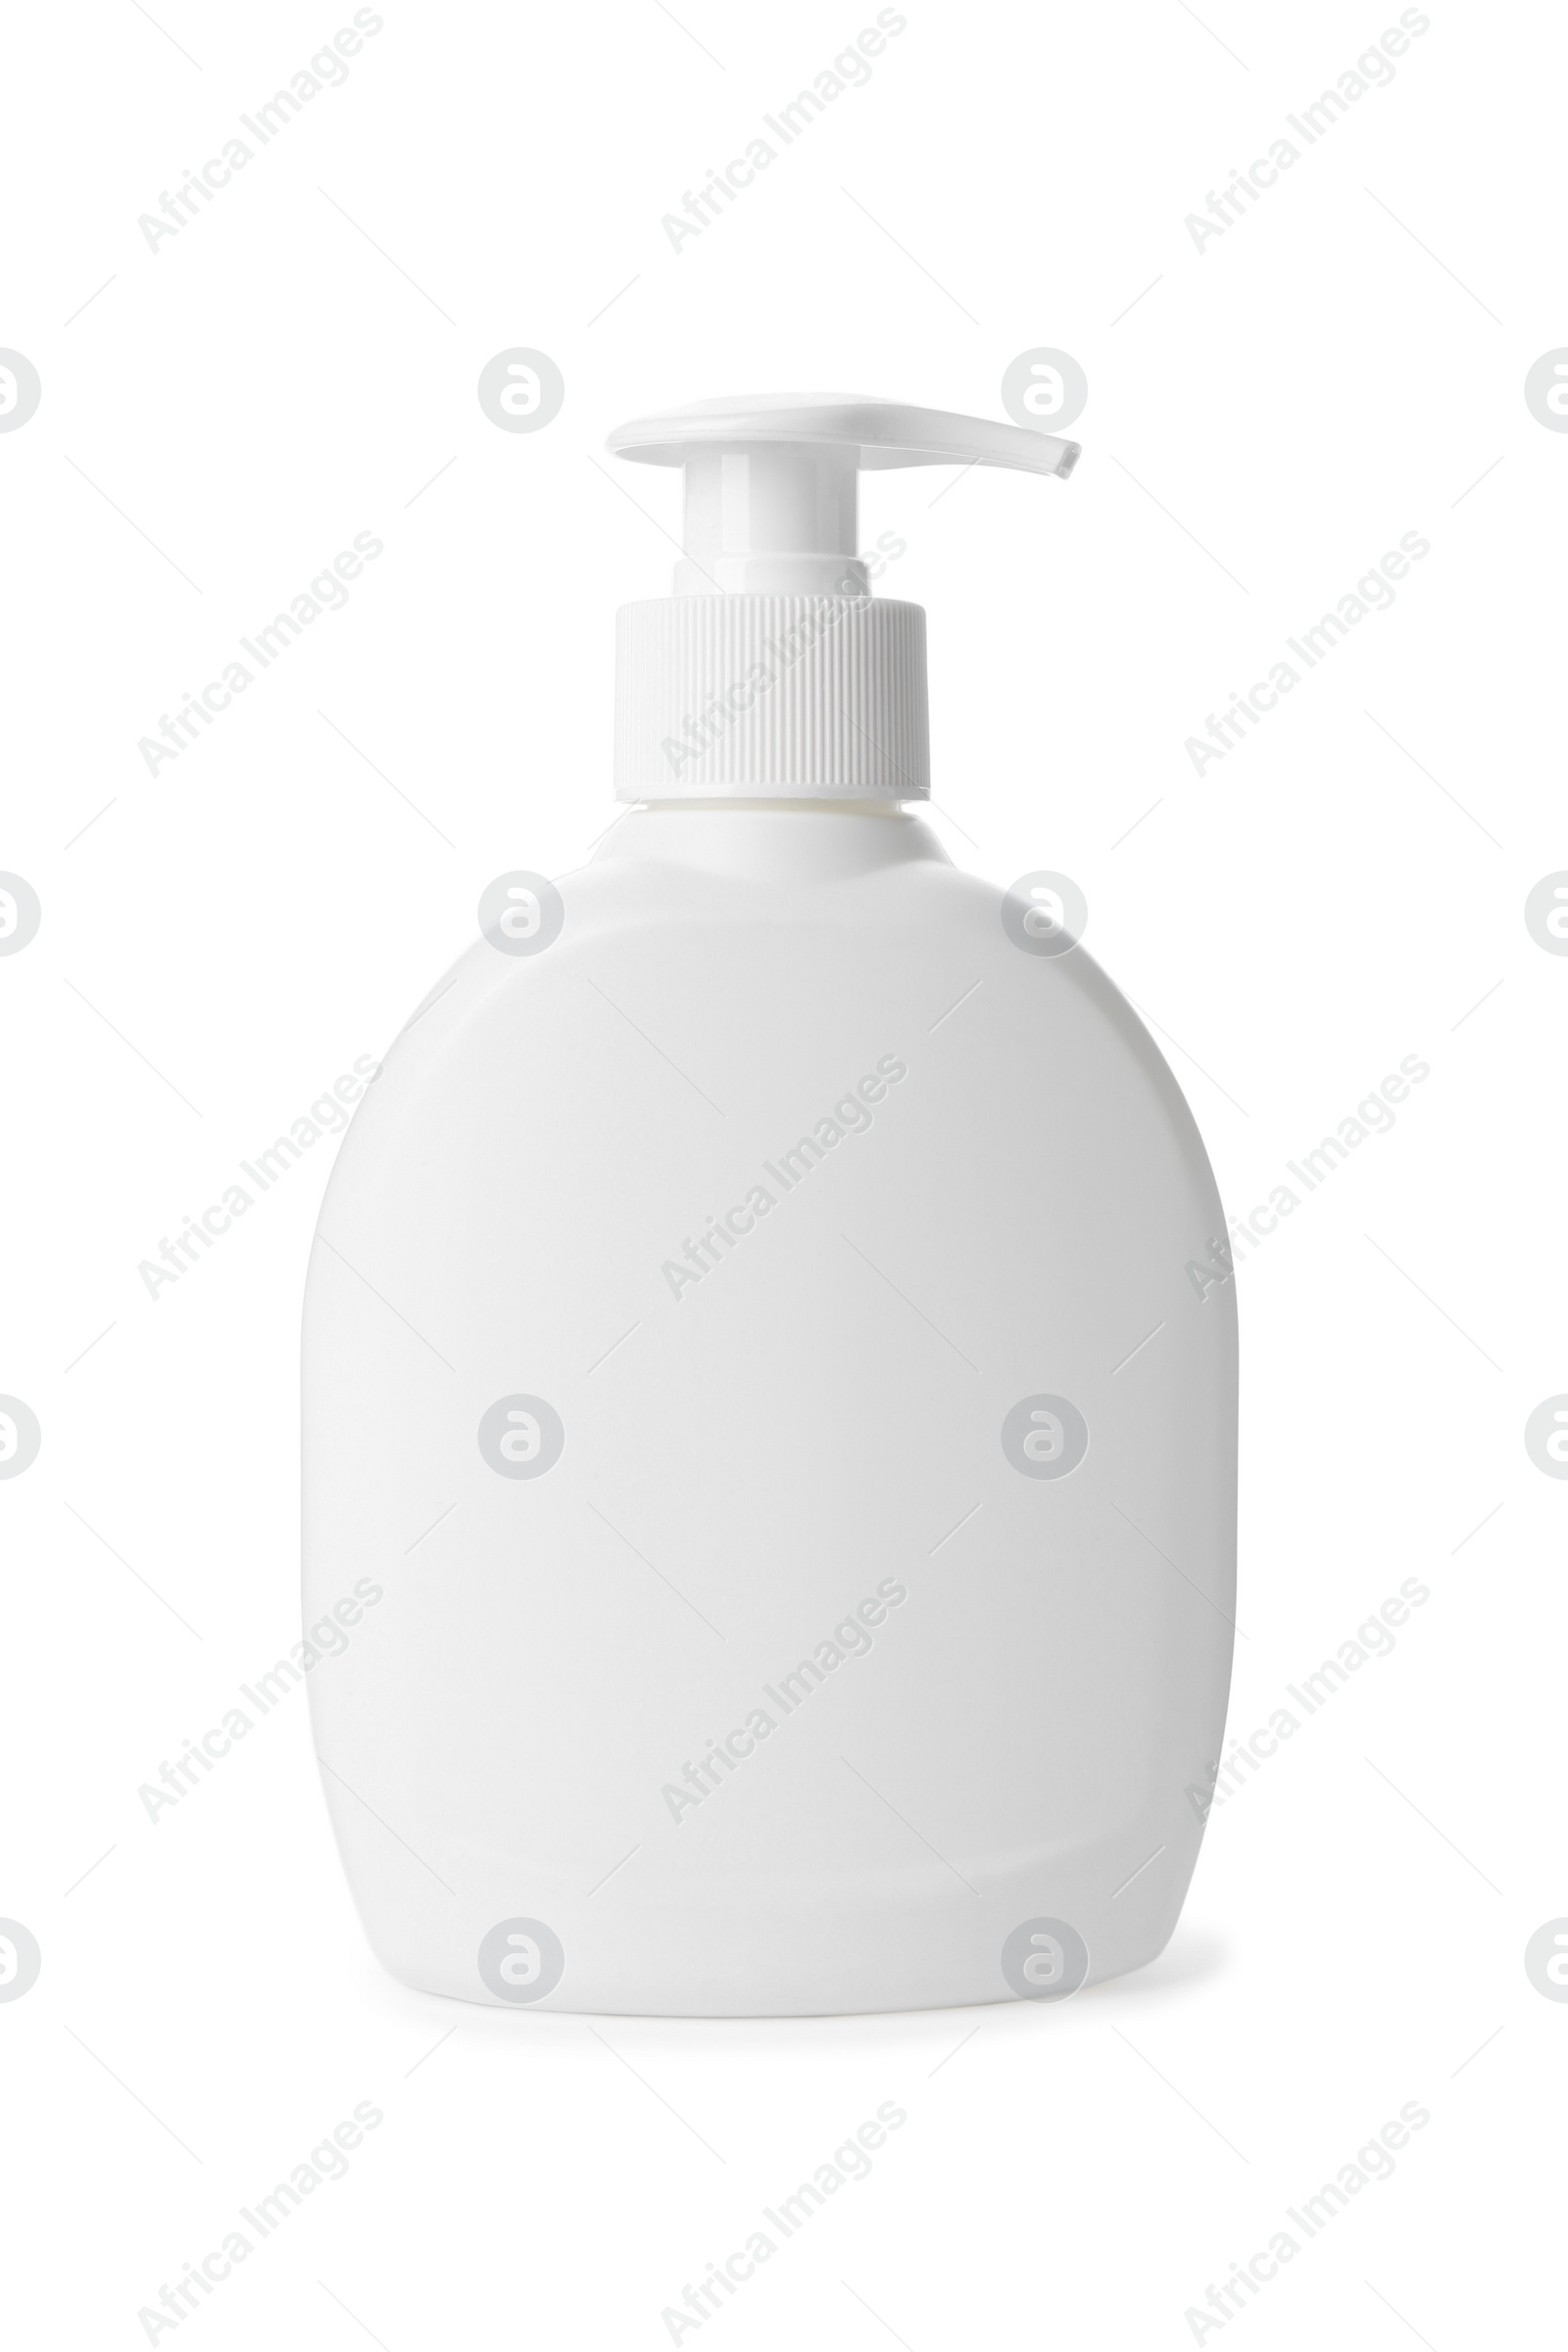 Photo of Bottle of cleaning supply isolated on white